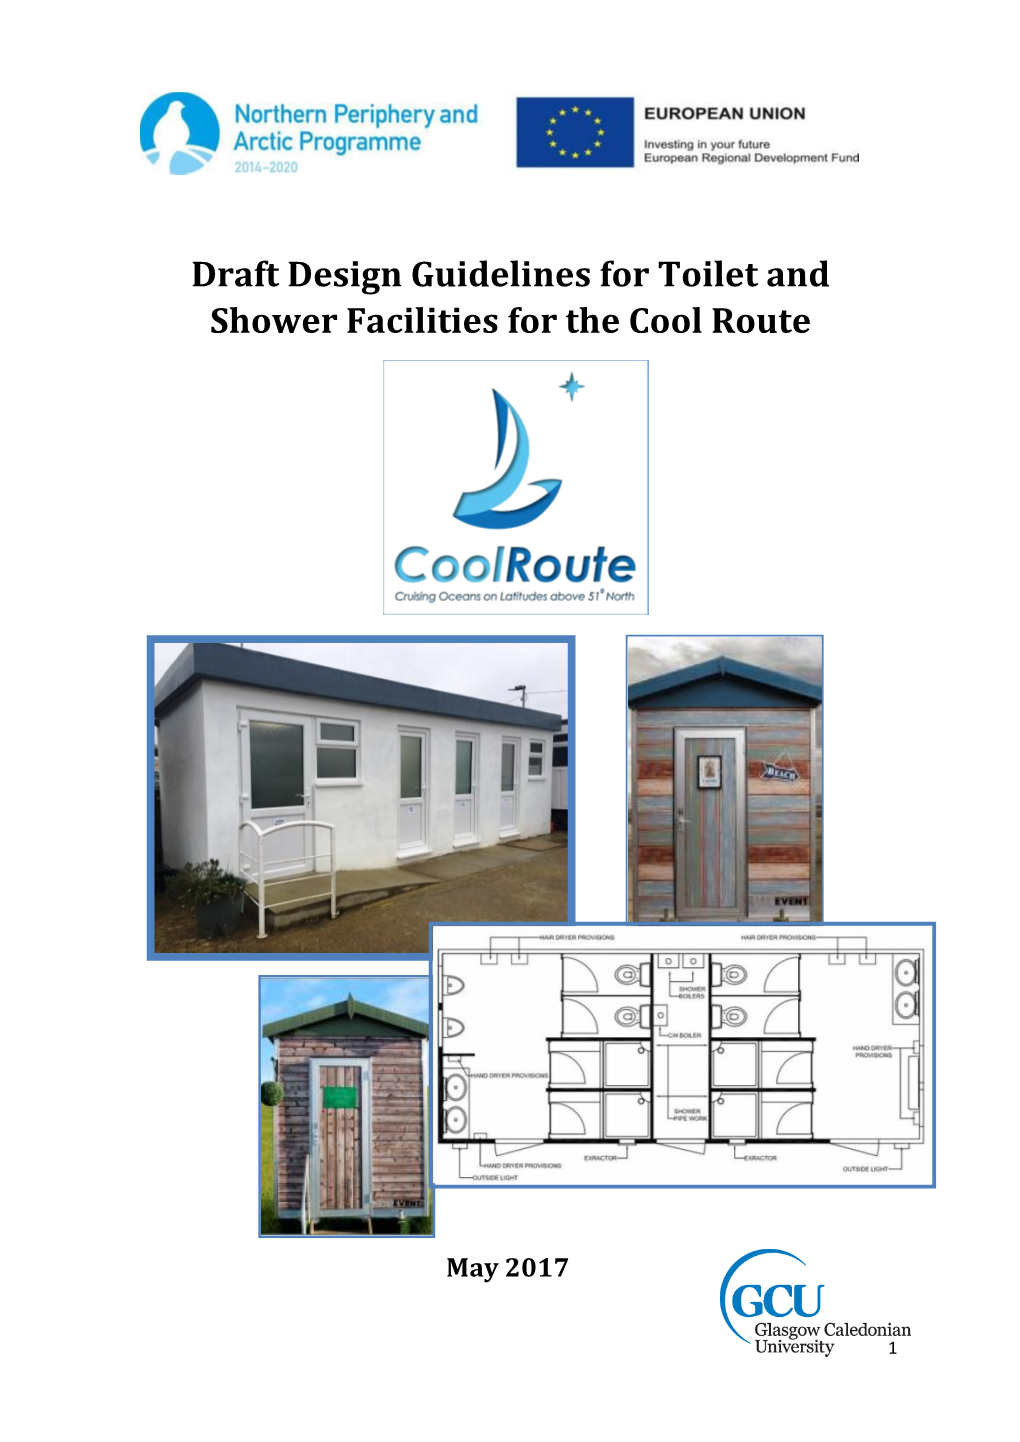 Draft Design Guidelines for Toilet and Shower Facilities for the Cool Route